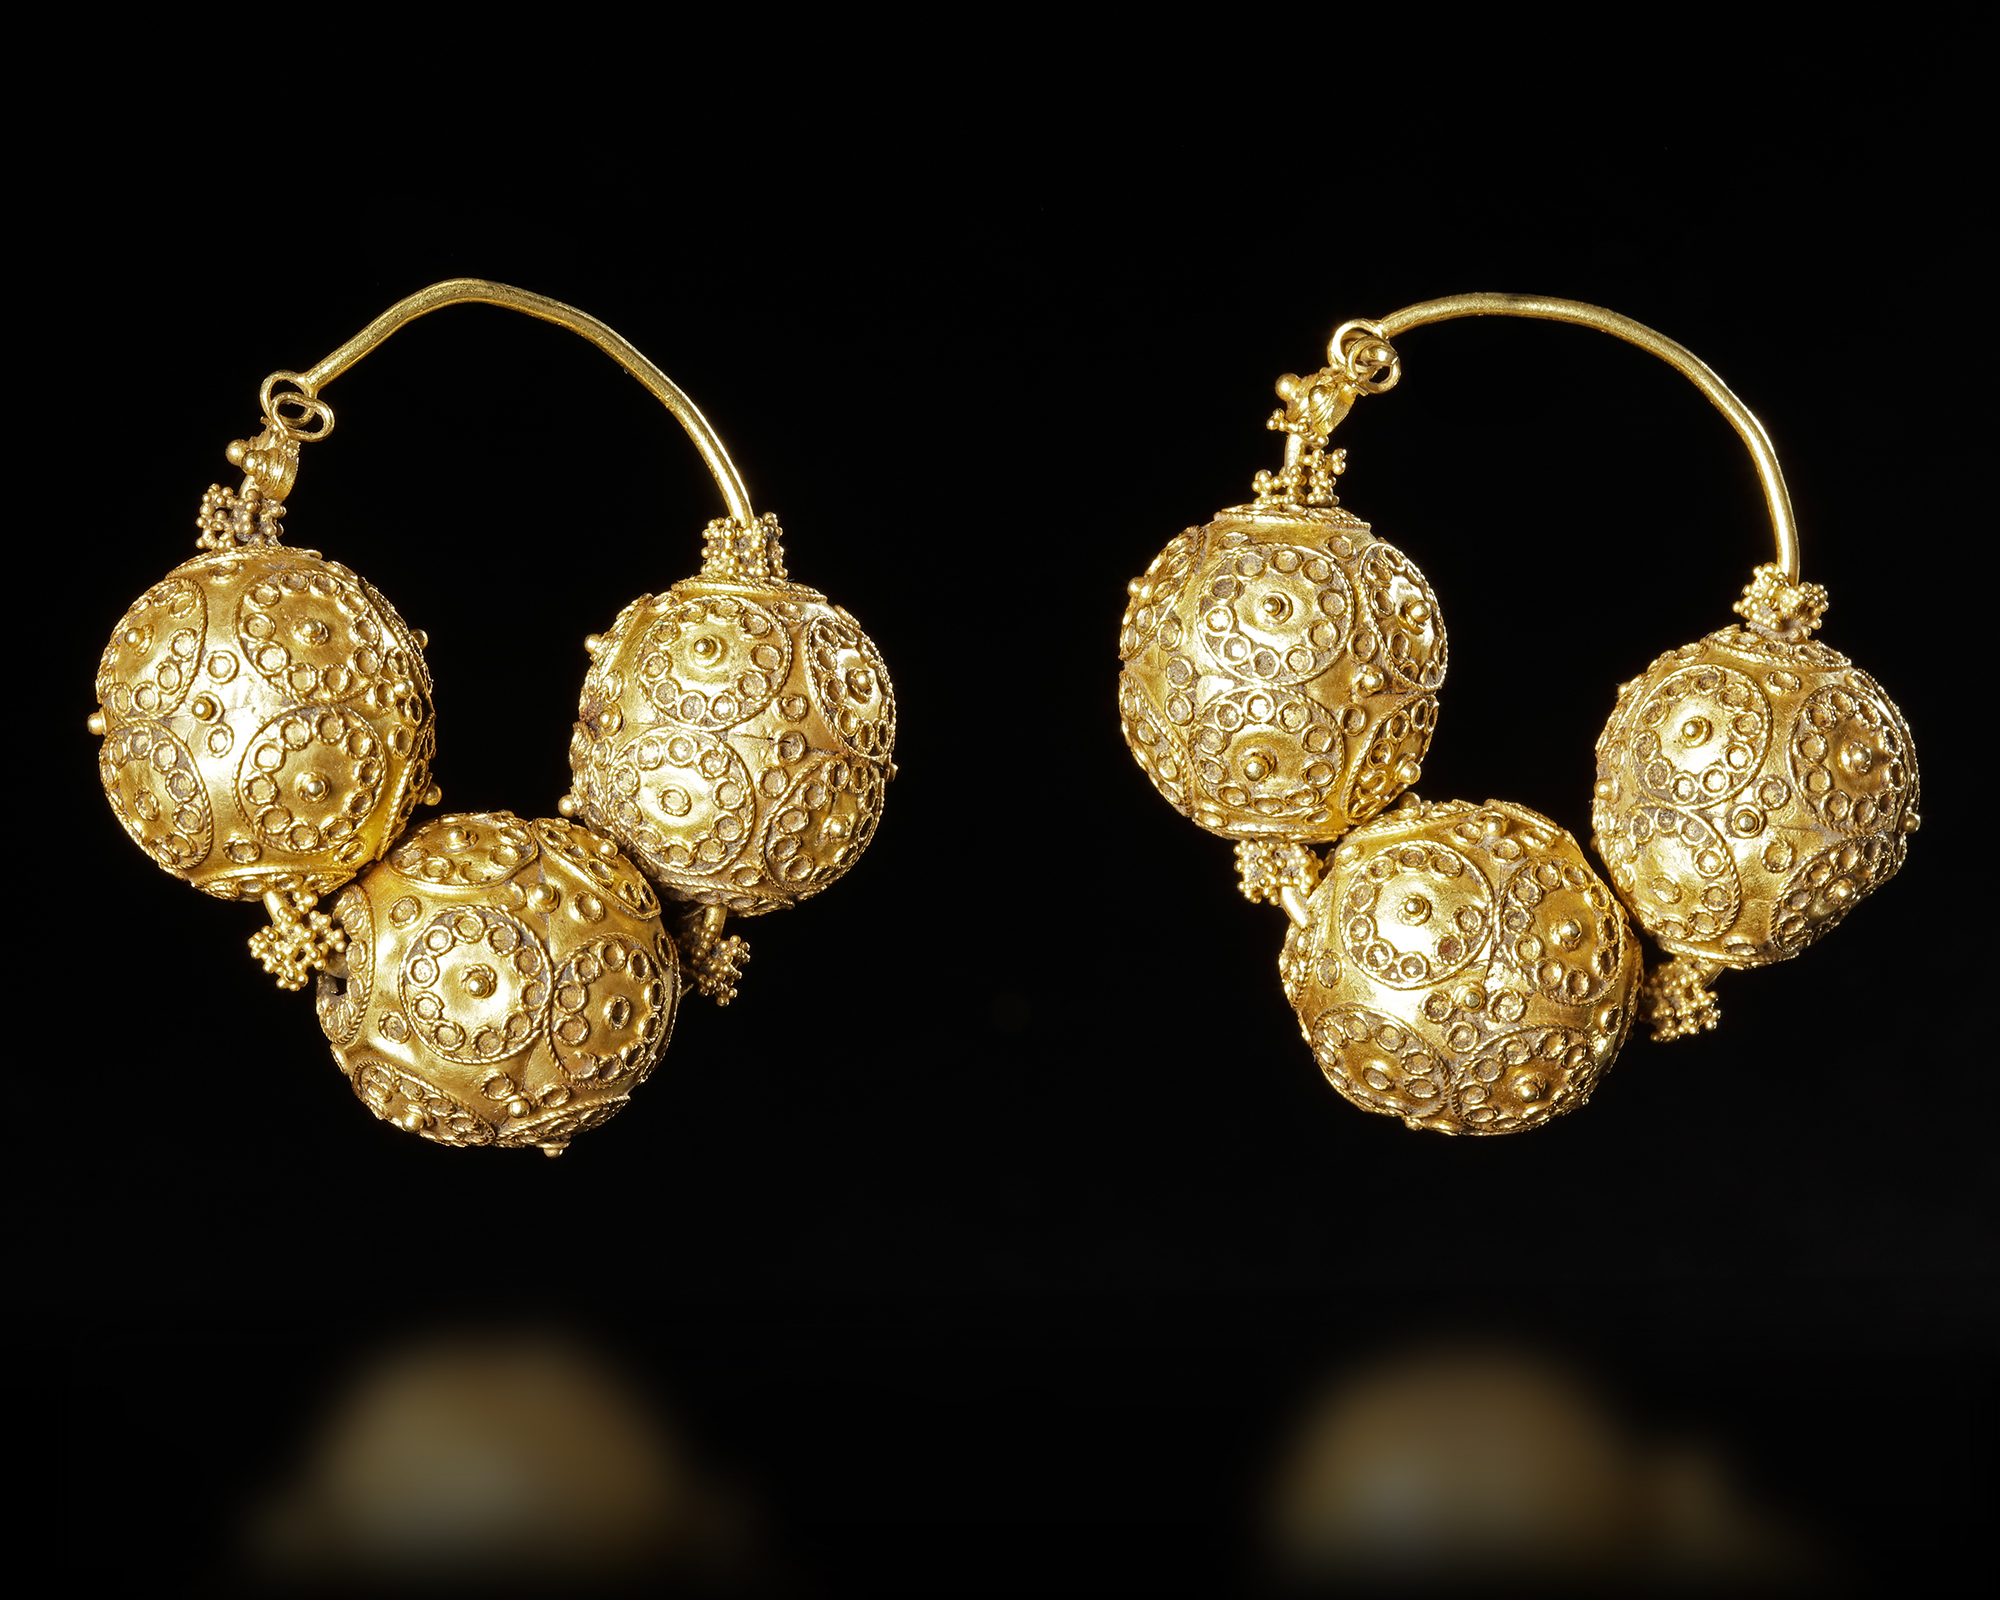 A PAIR OF EARLY ISLAMIC GOLD EARRINGS, 12TH CENTURY